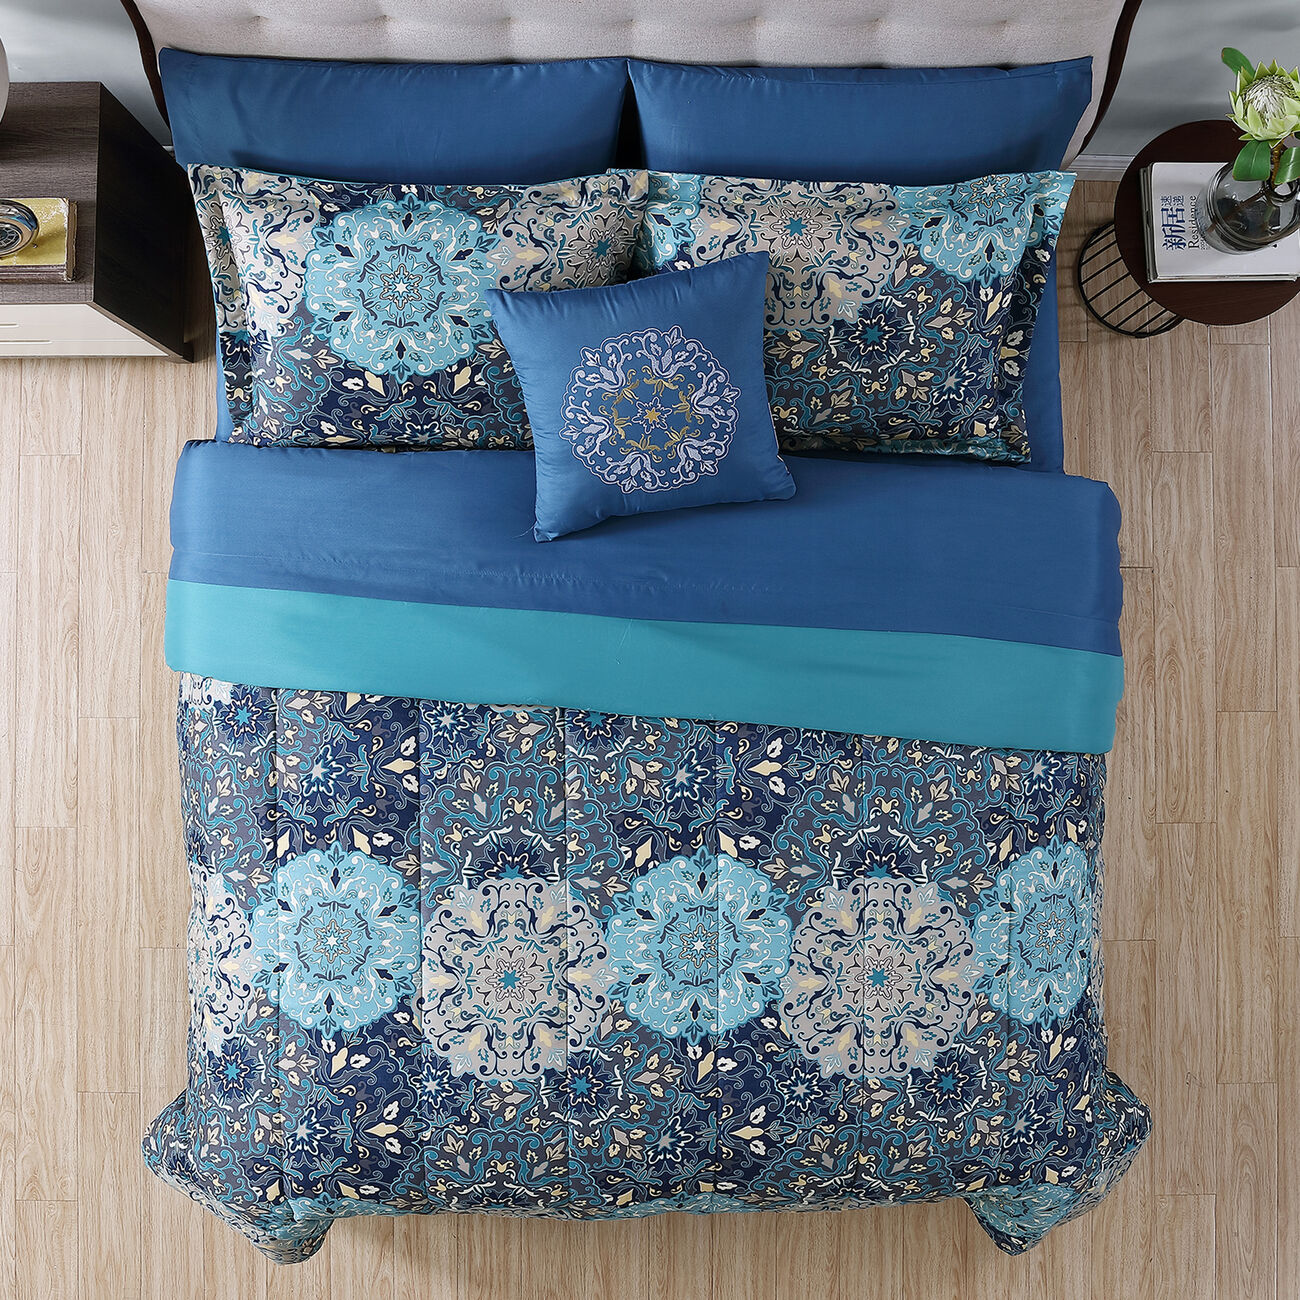 Caen 8 Piece King Size Printed Reversible Bed Set The Urban Port, Blue